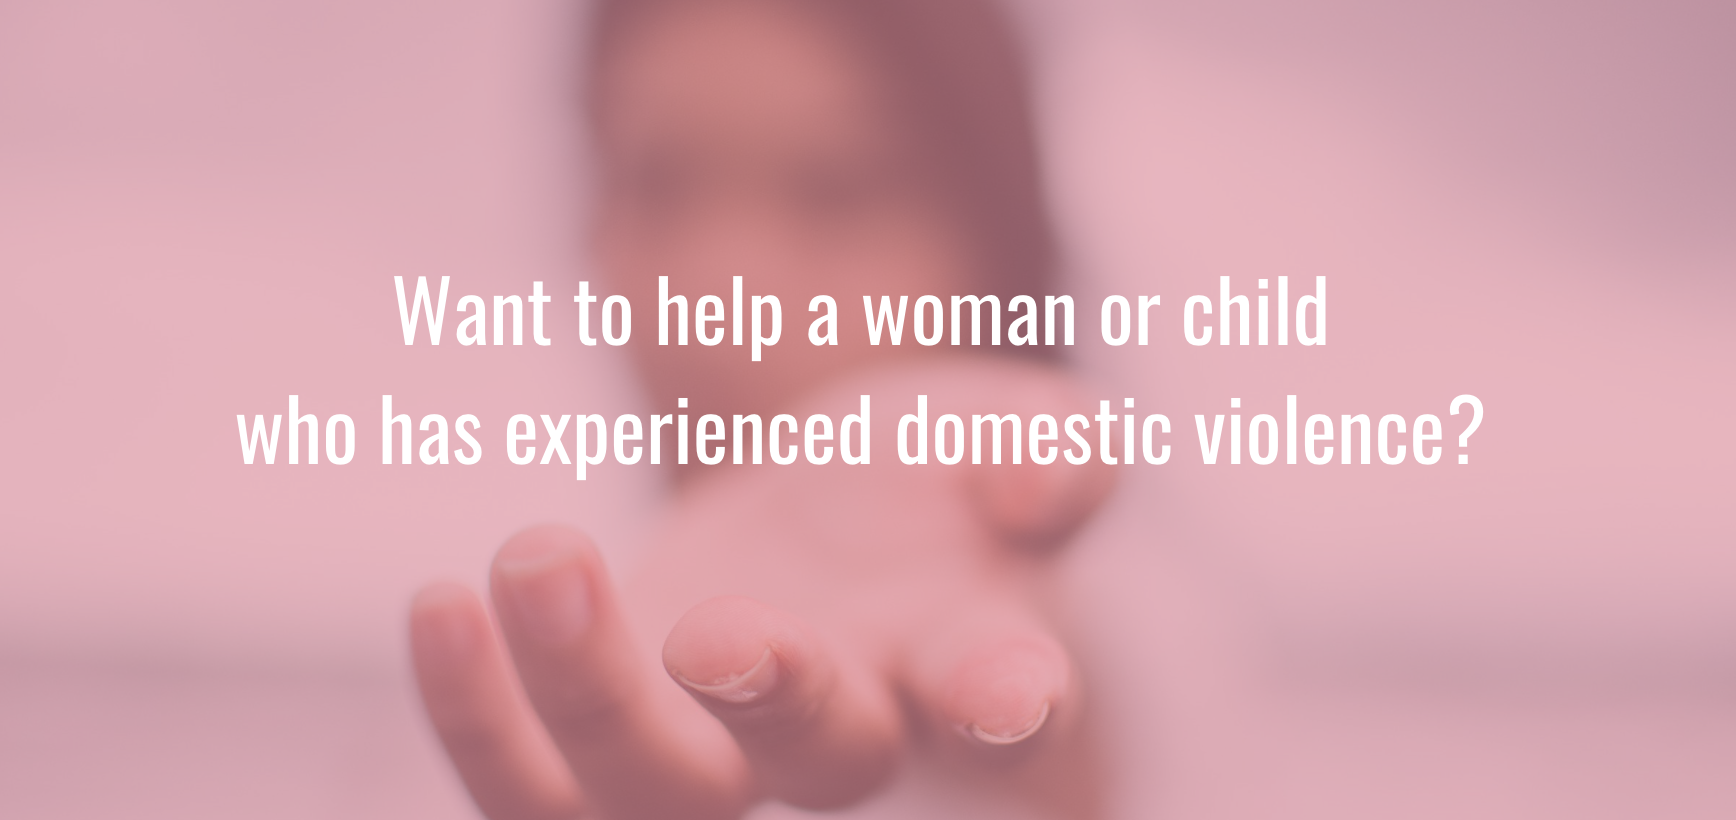 Want to help a woman or child who has experienced domestic violence?